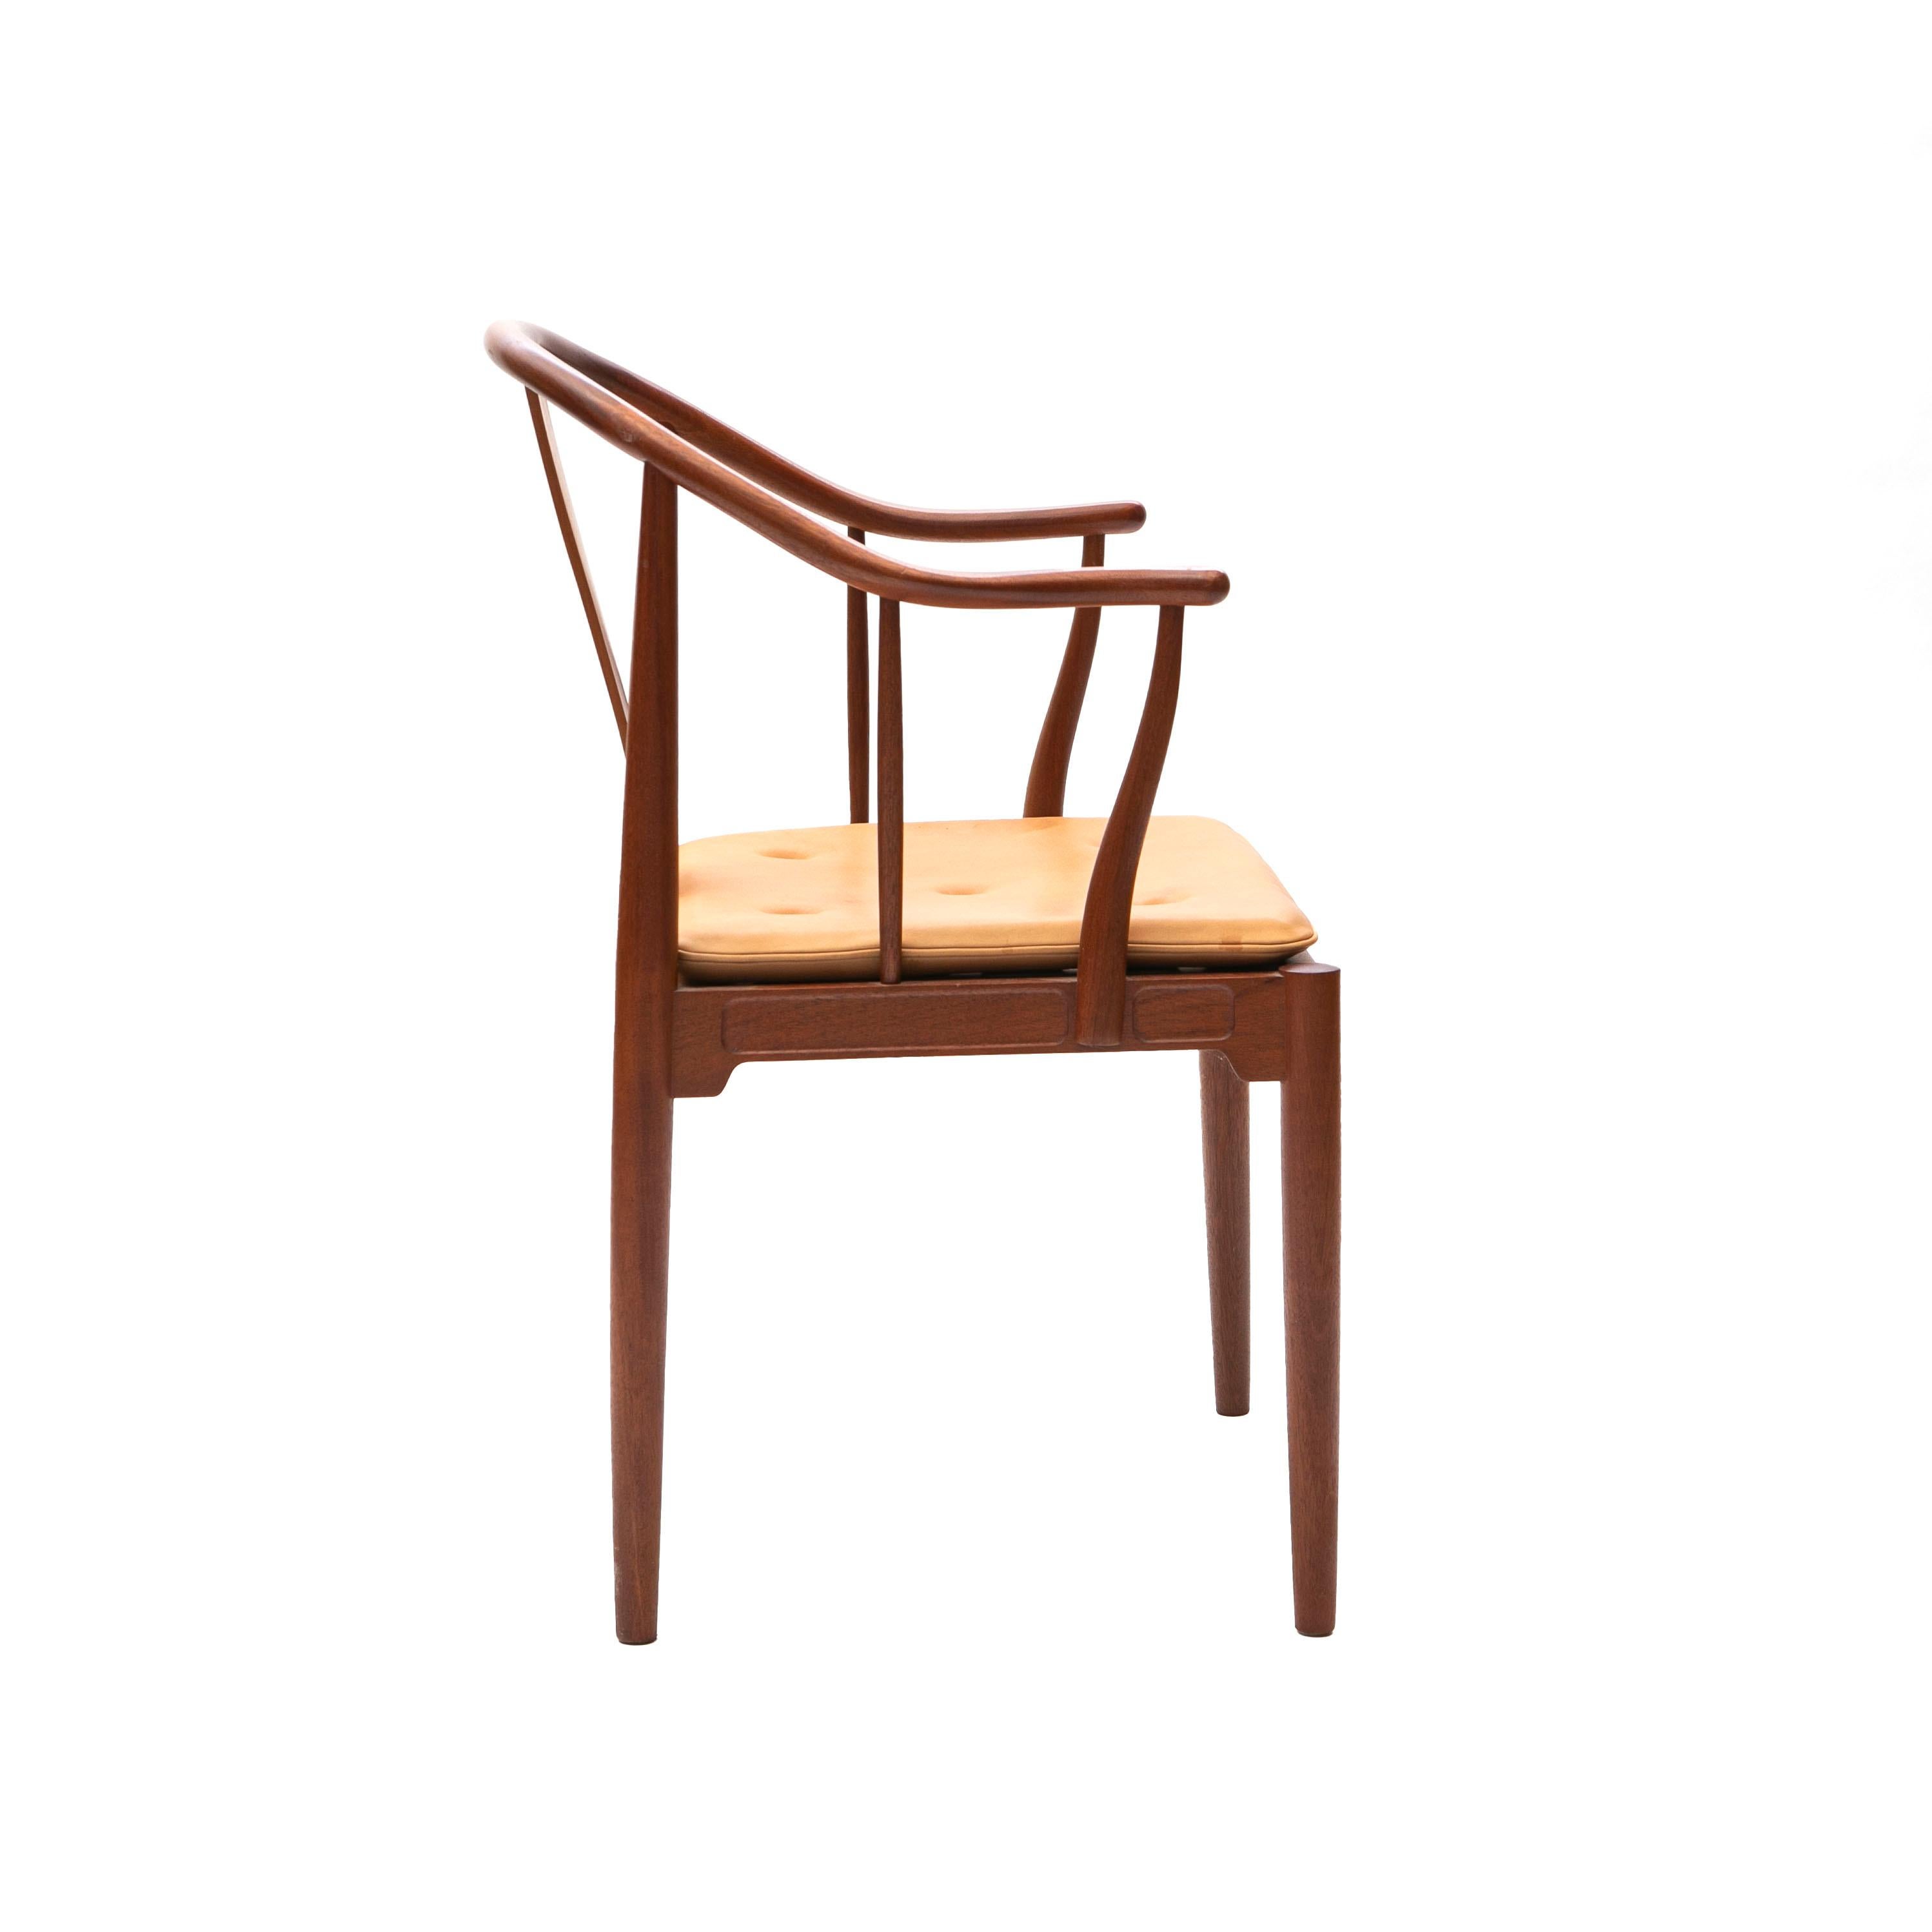 Hans J. Wegner The China Chair in mahogany with natural leather cushion.
Designed 1944 and manufactured by Fritz Hansen, 1991.

Very good original condition.